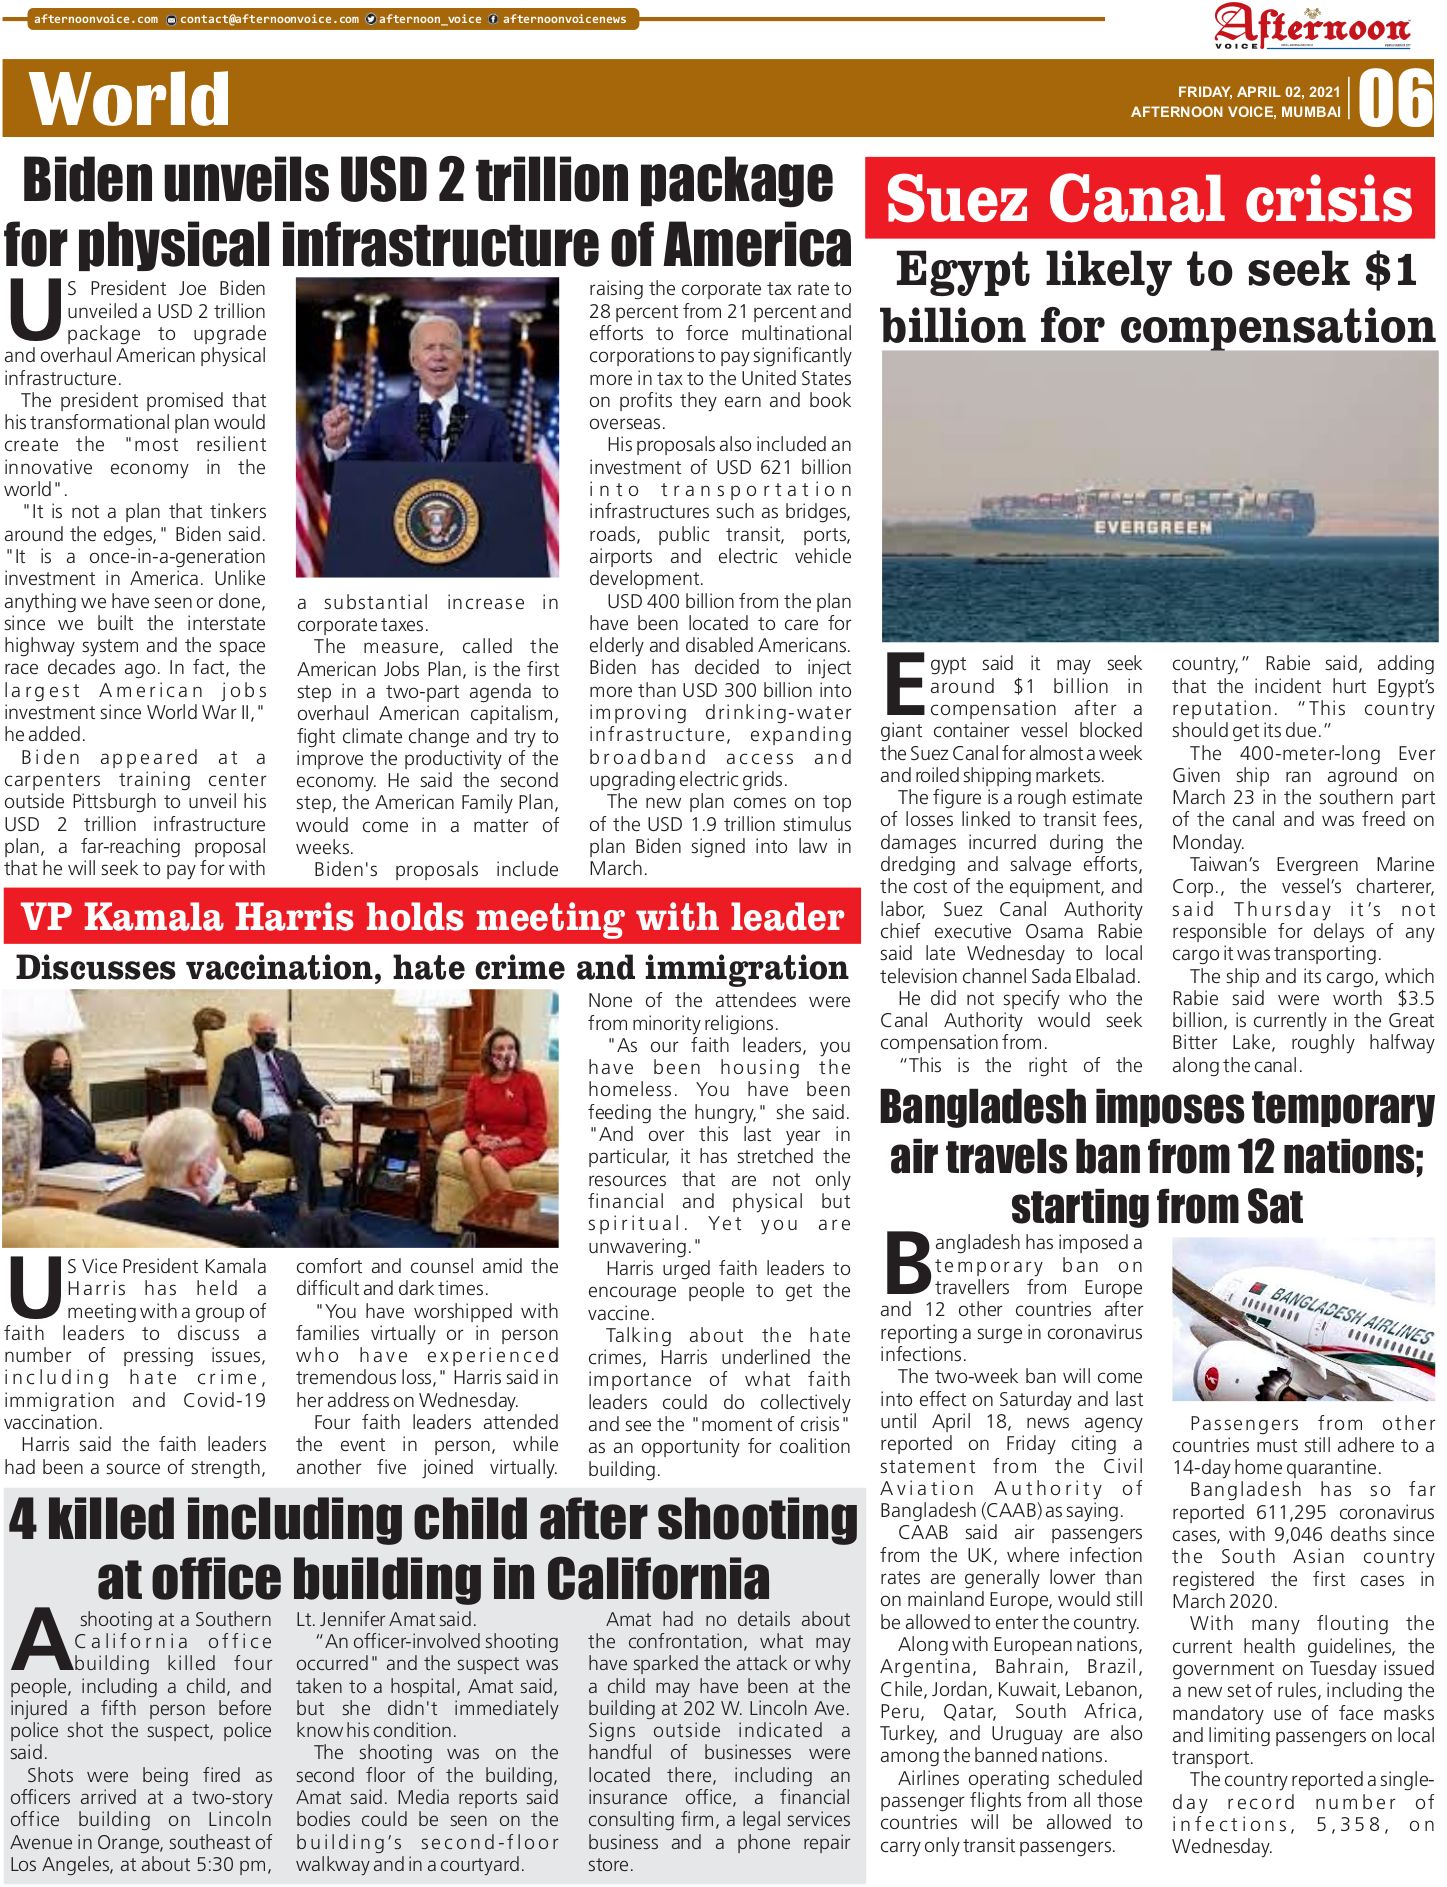 02 April 21 Page 6 Online English News Paper Daily News Epaper Today Newspaper